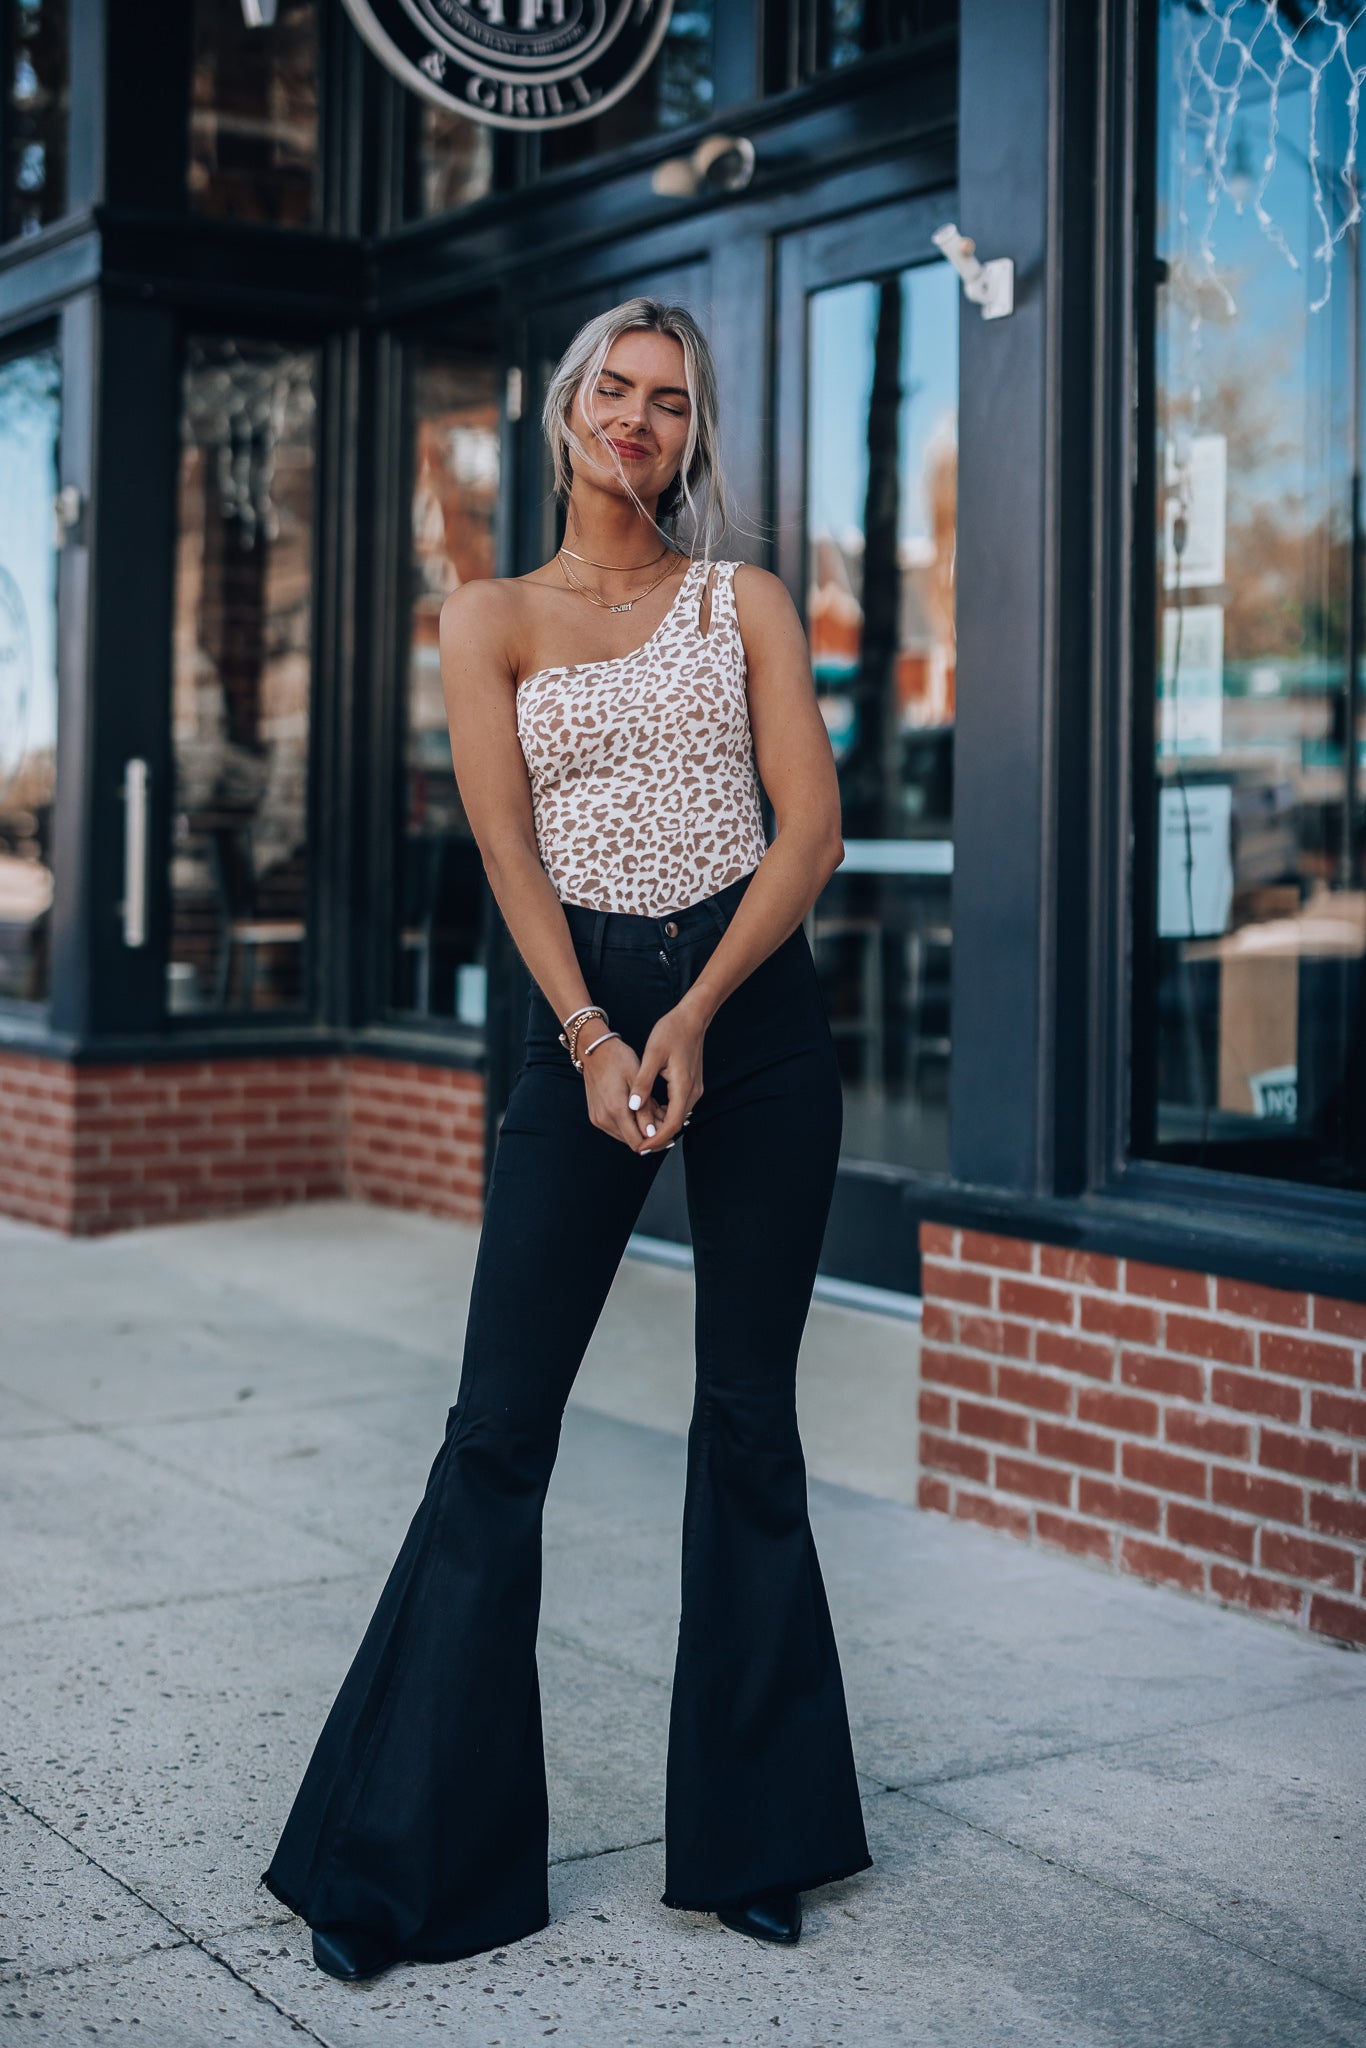 what to wear with flare jeans - flare pants outfit ideas you will love